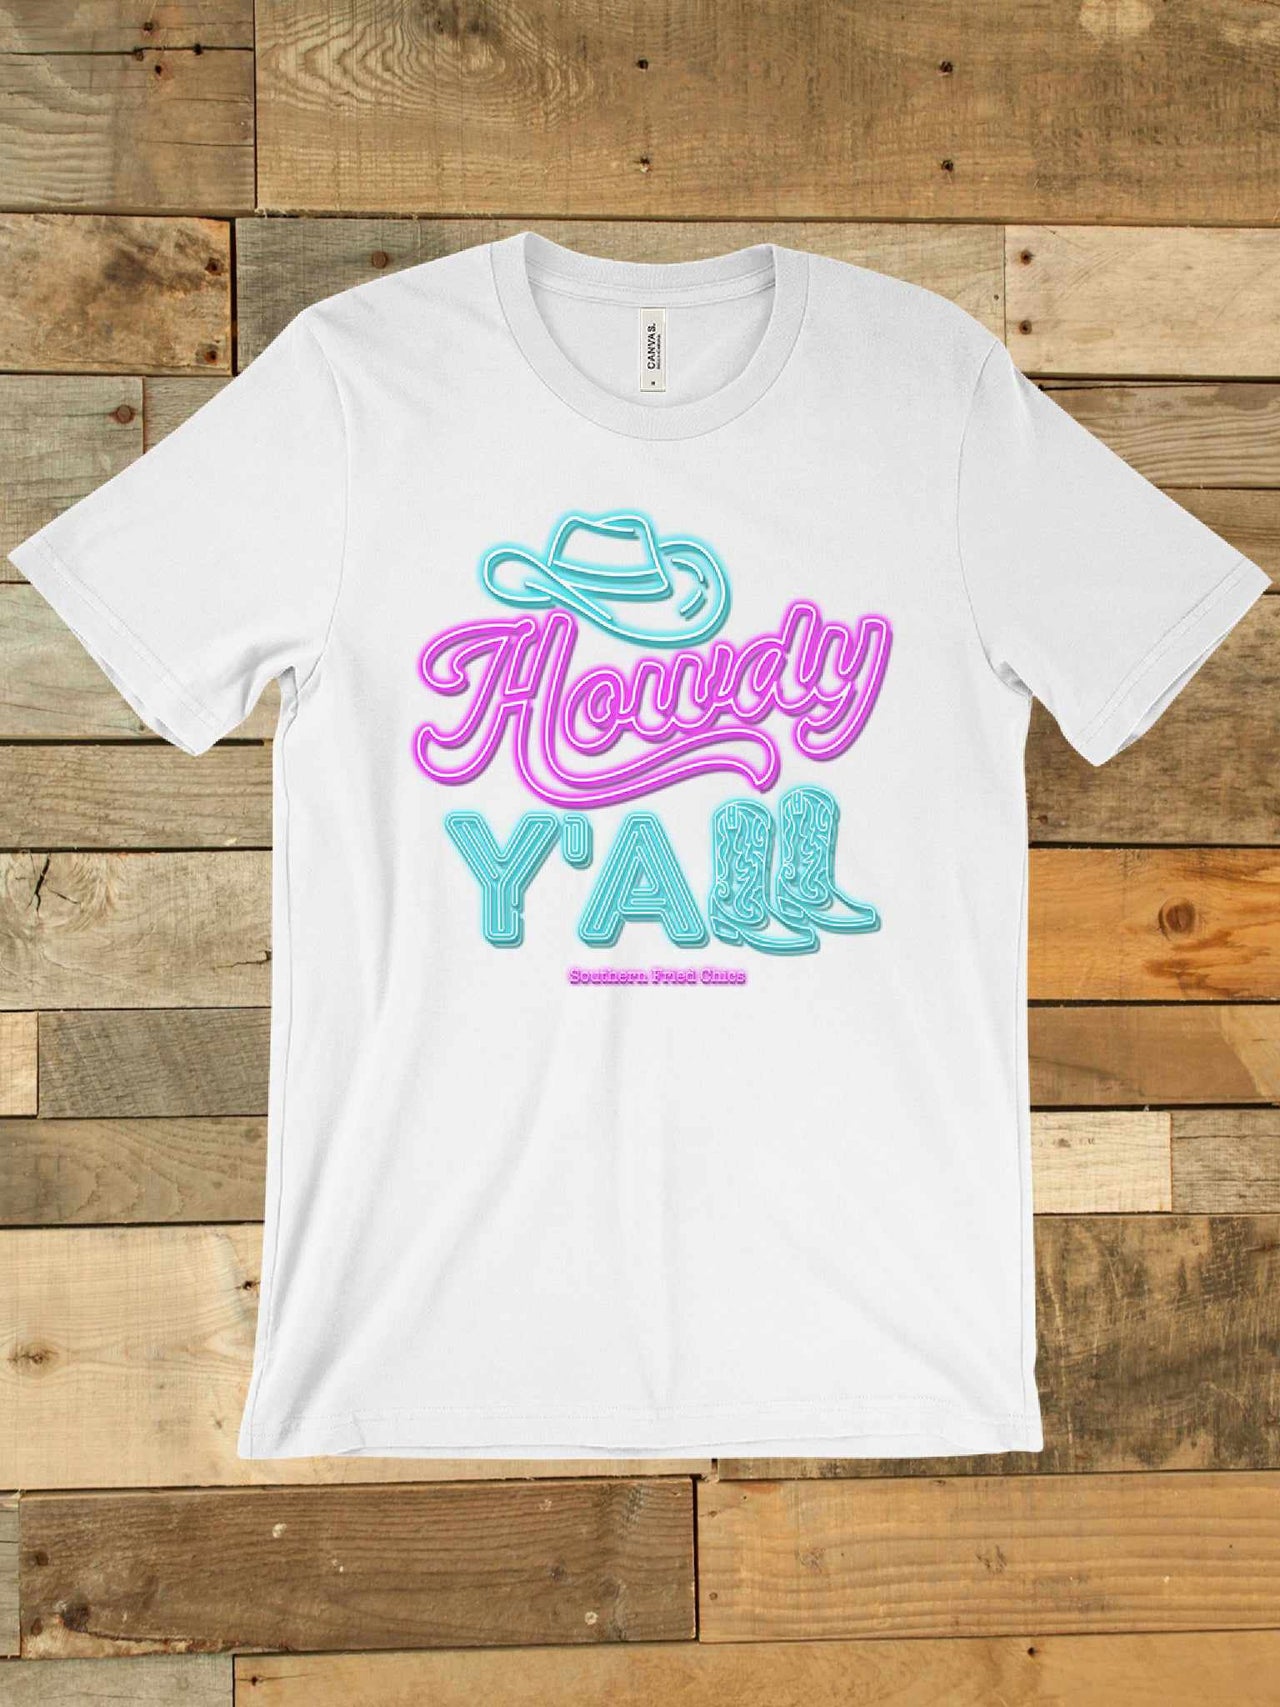 Howdy y'all neon sign t-shirt.